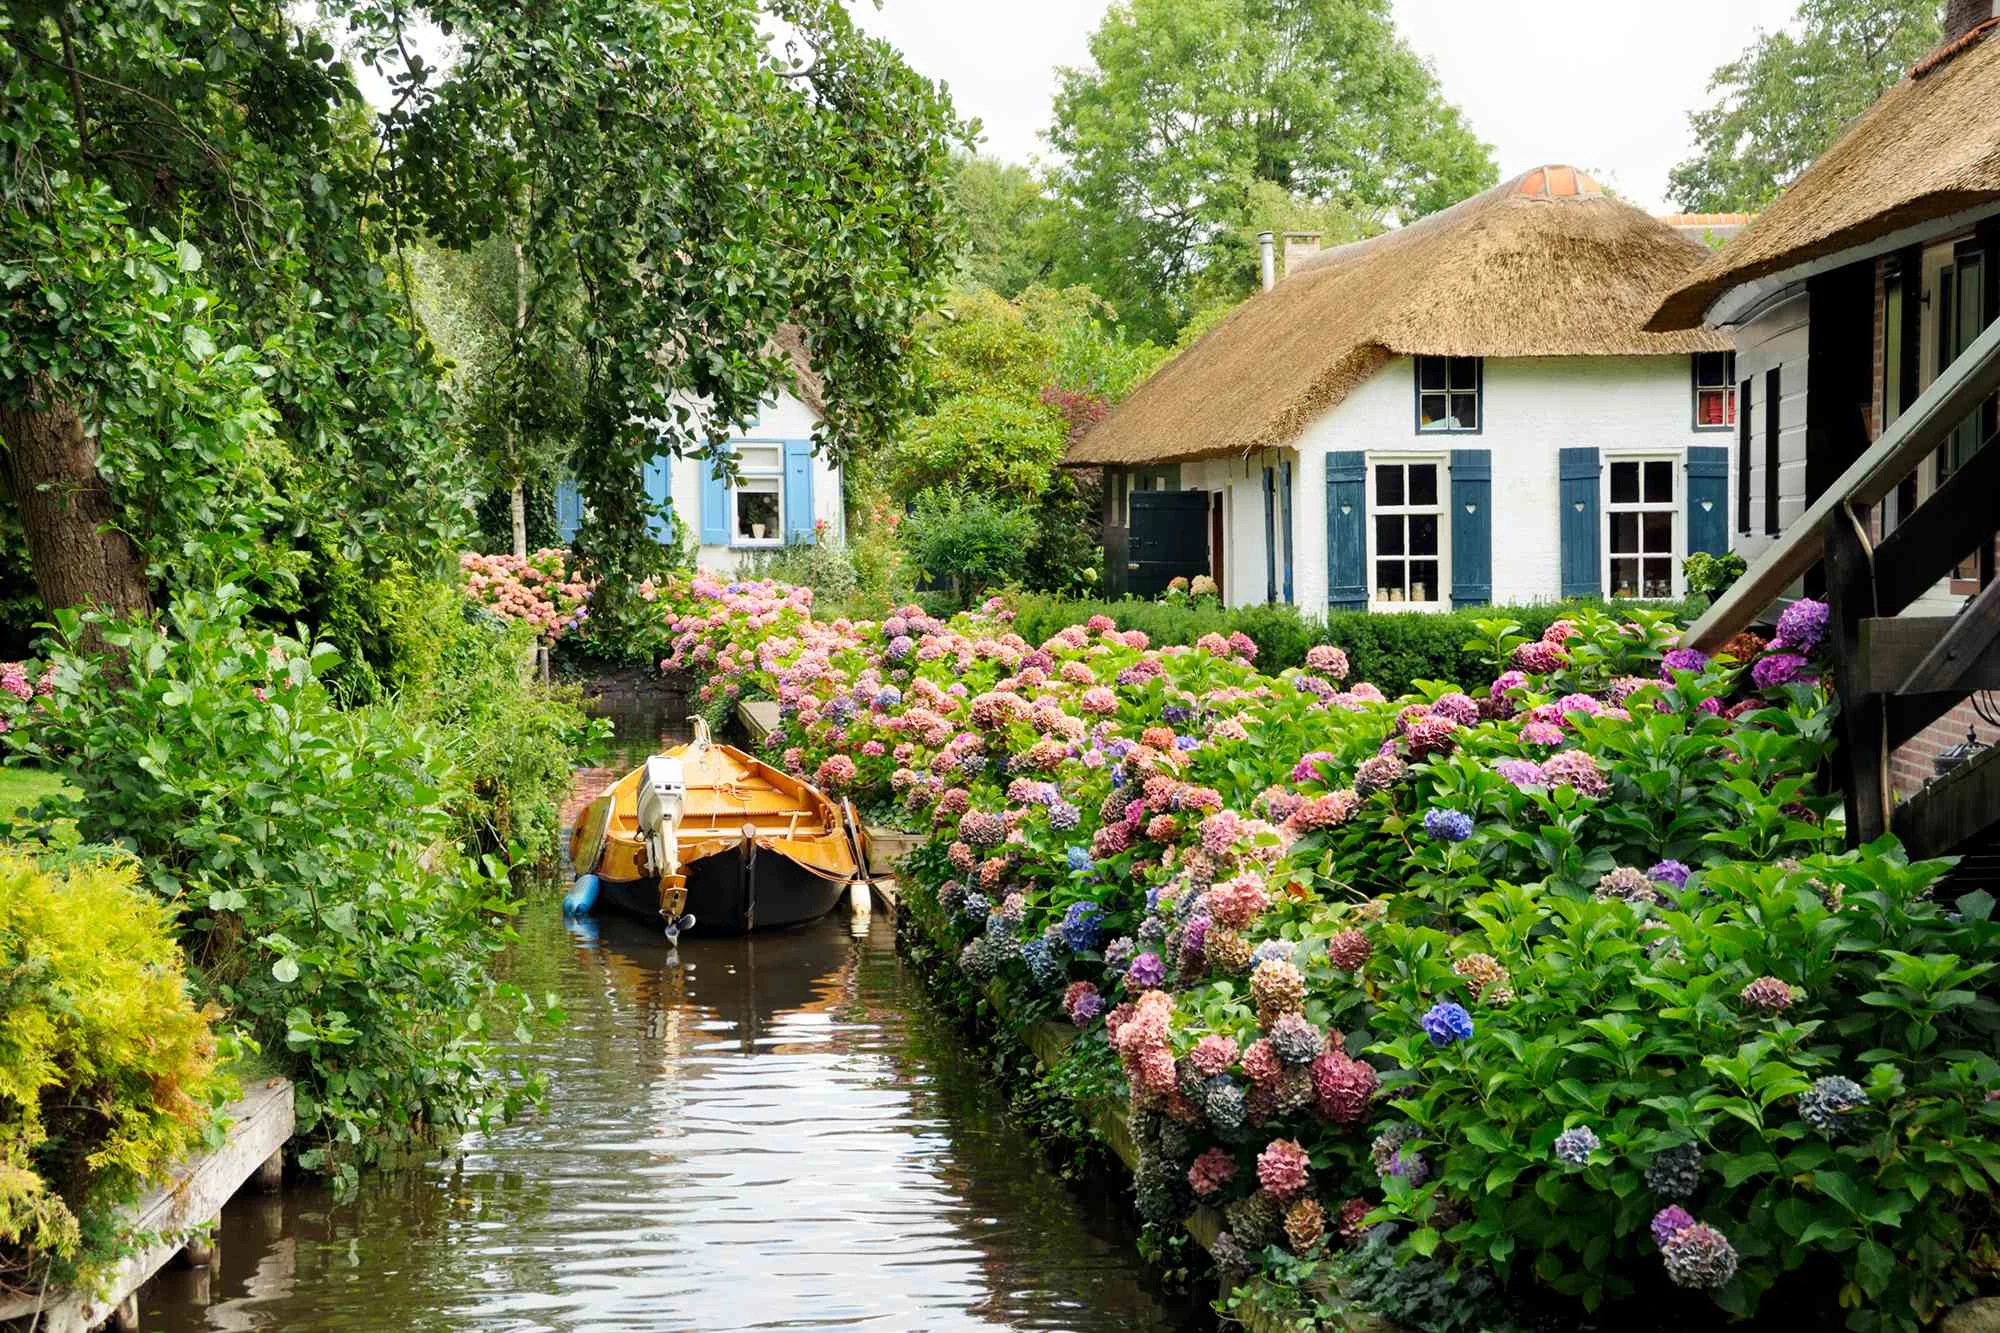 A boat paddles through Giethoorn, one of the beautiful canals in Netherland